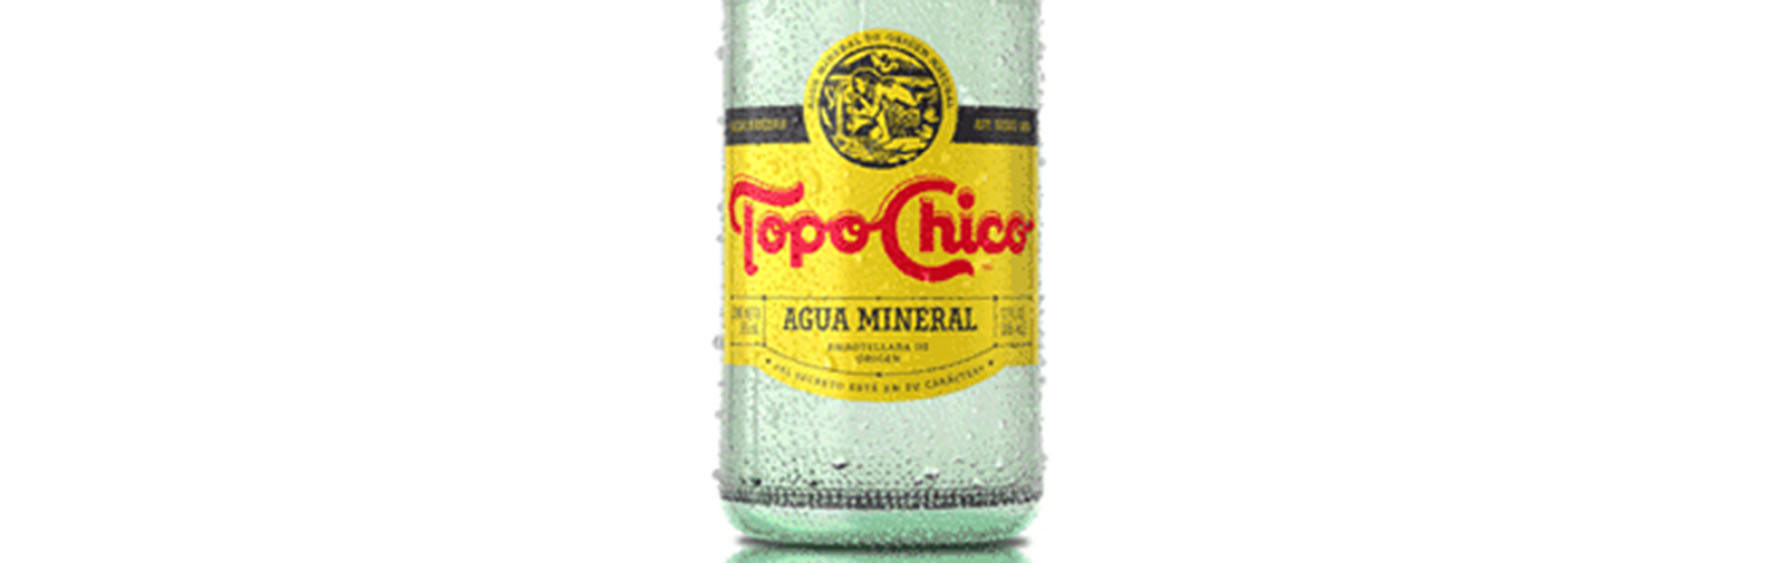 Topo Chico sparkling mineral water from Mexico